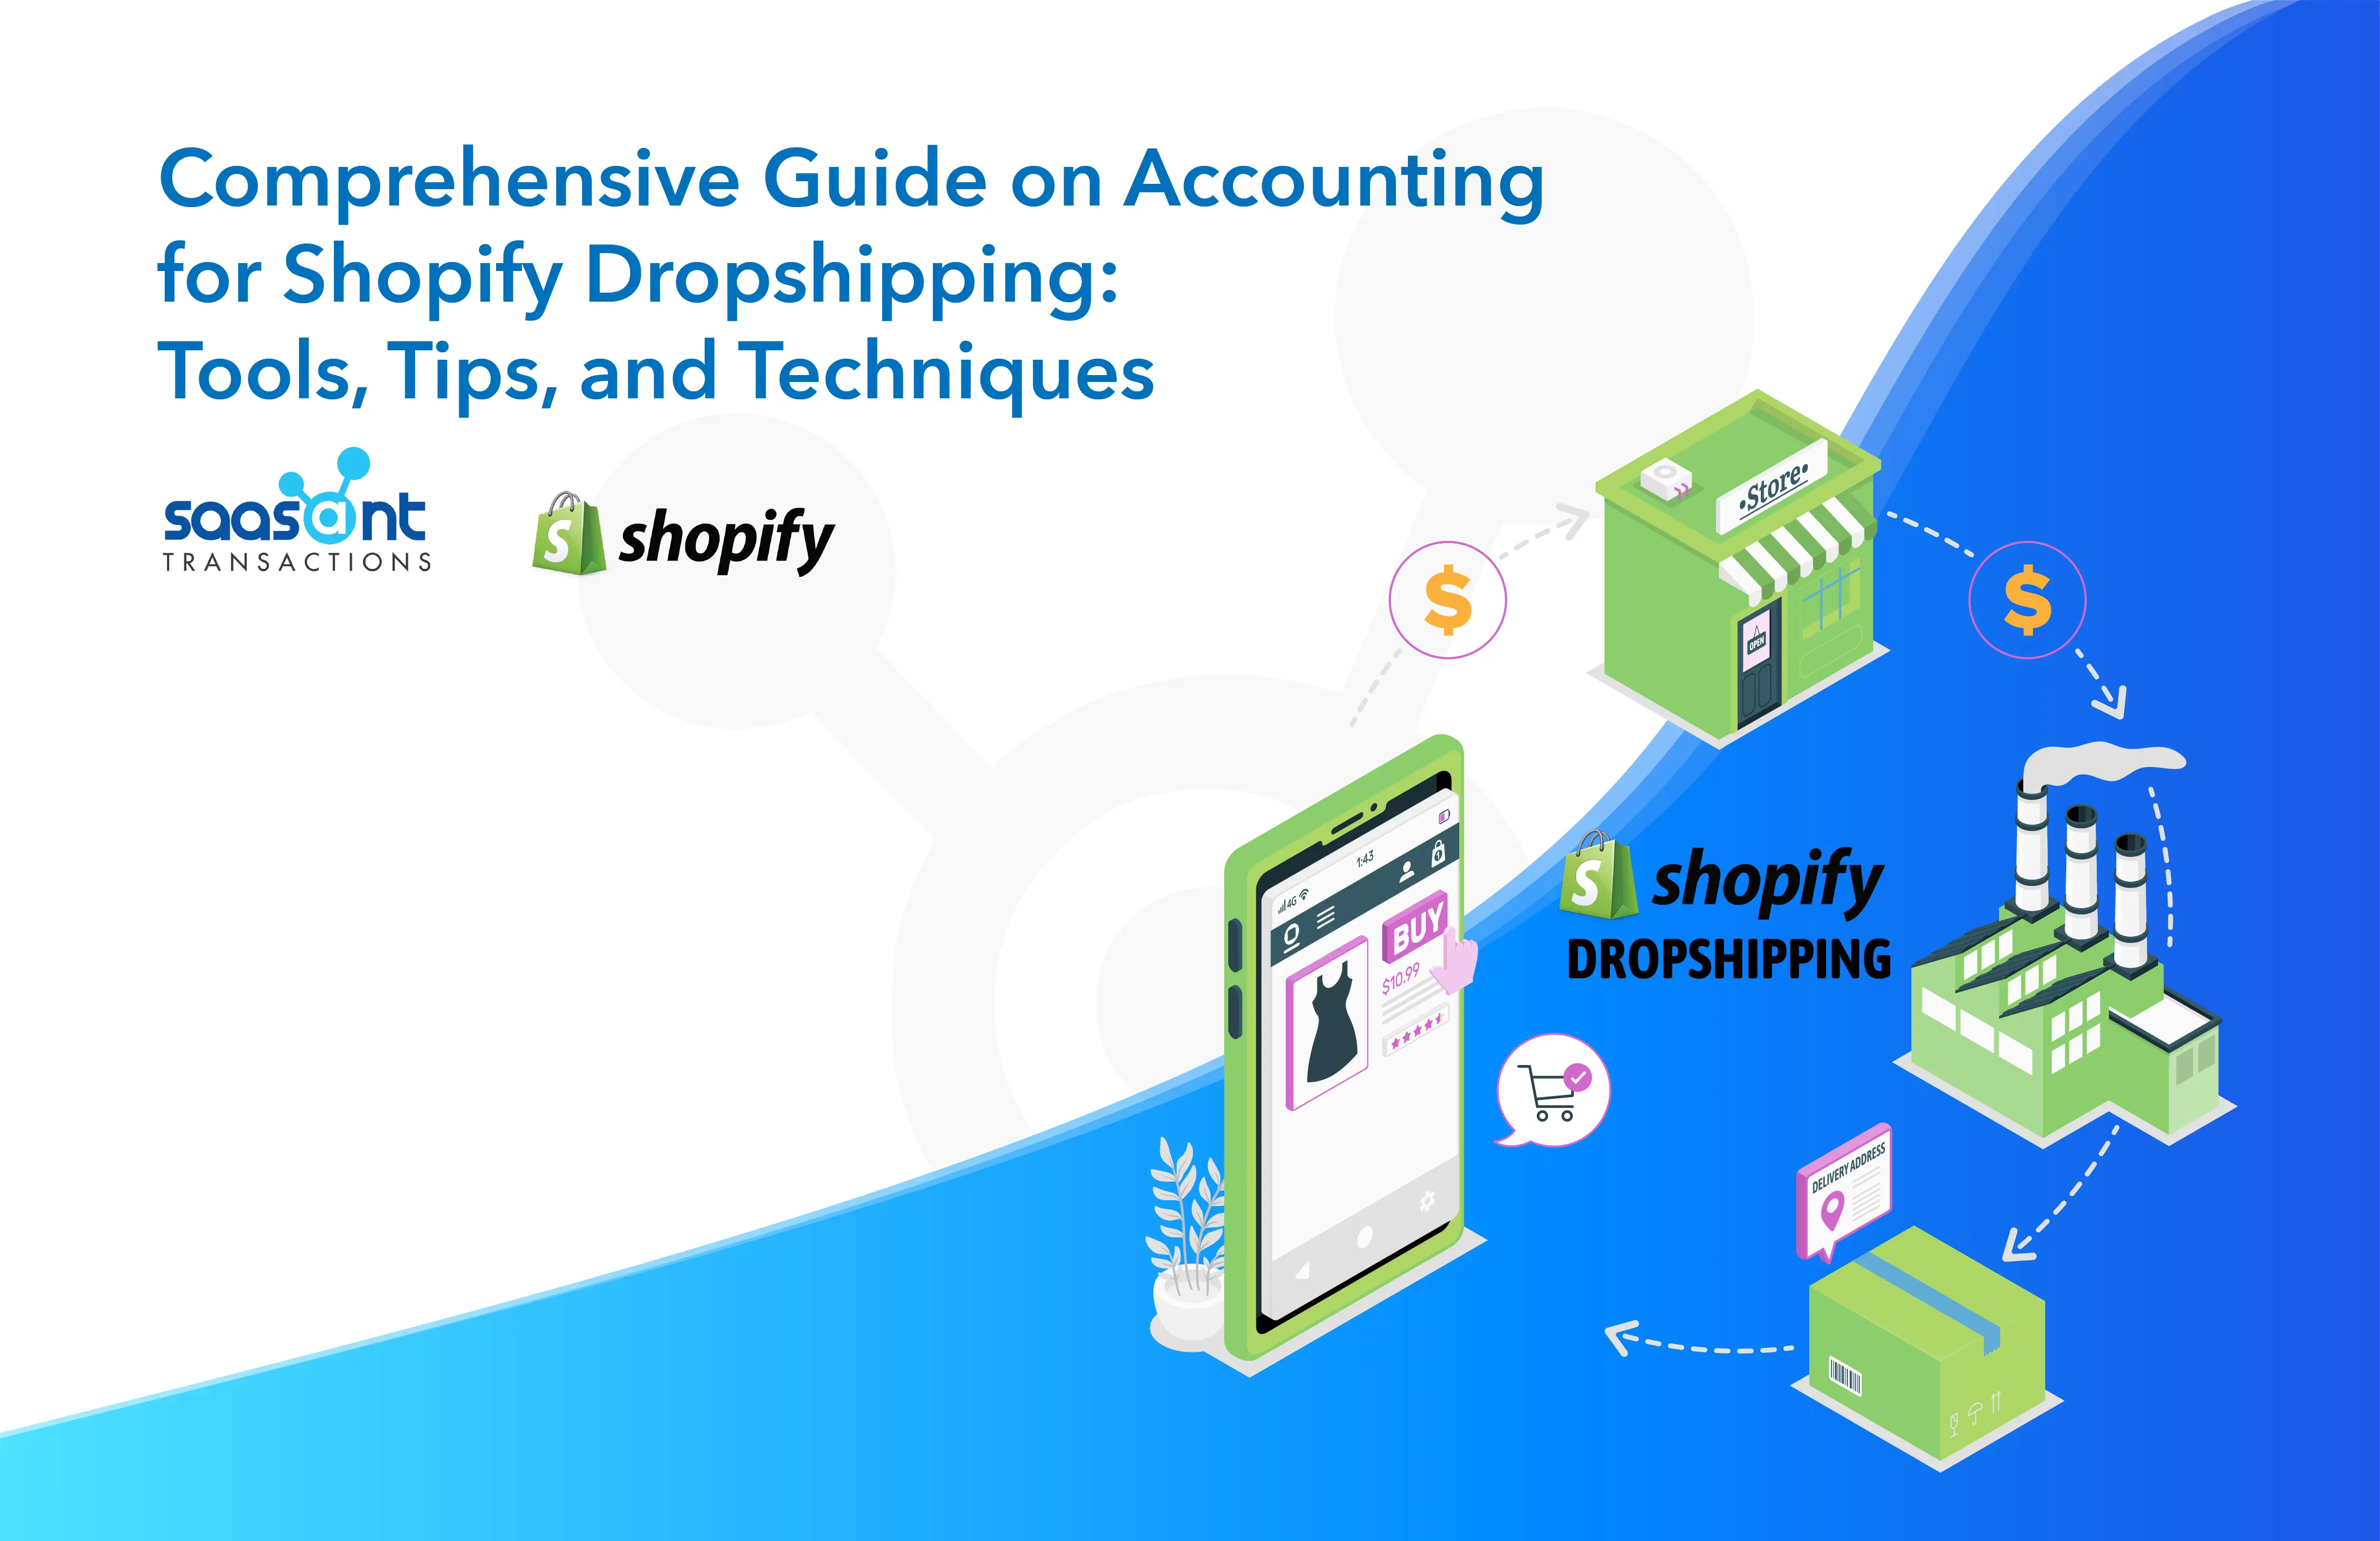 Shopify login: The comprehensive guide you need to know